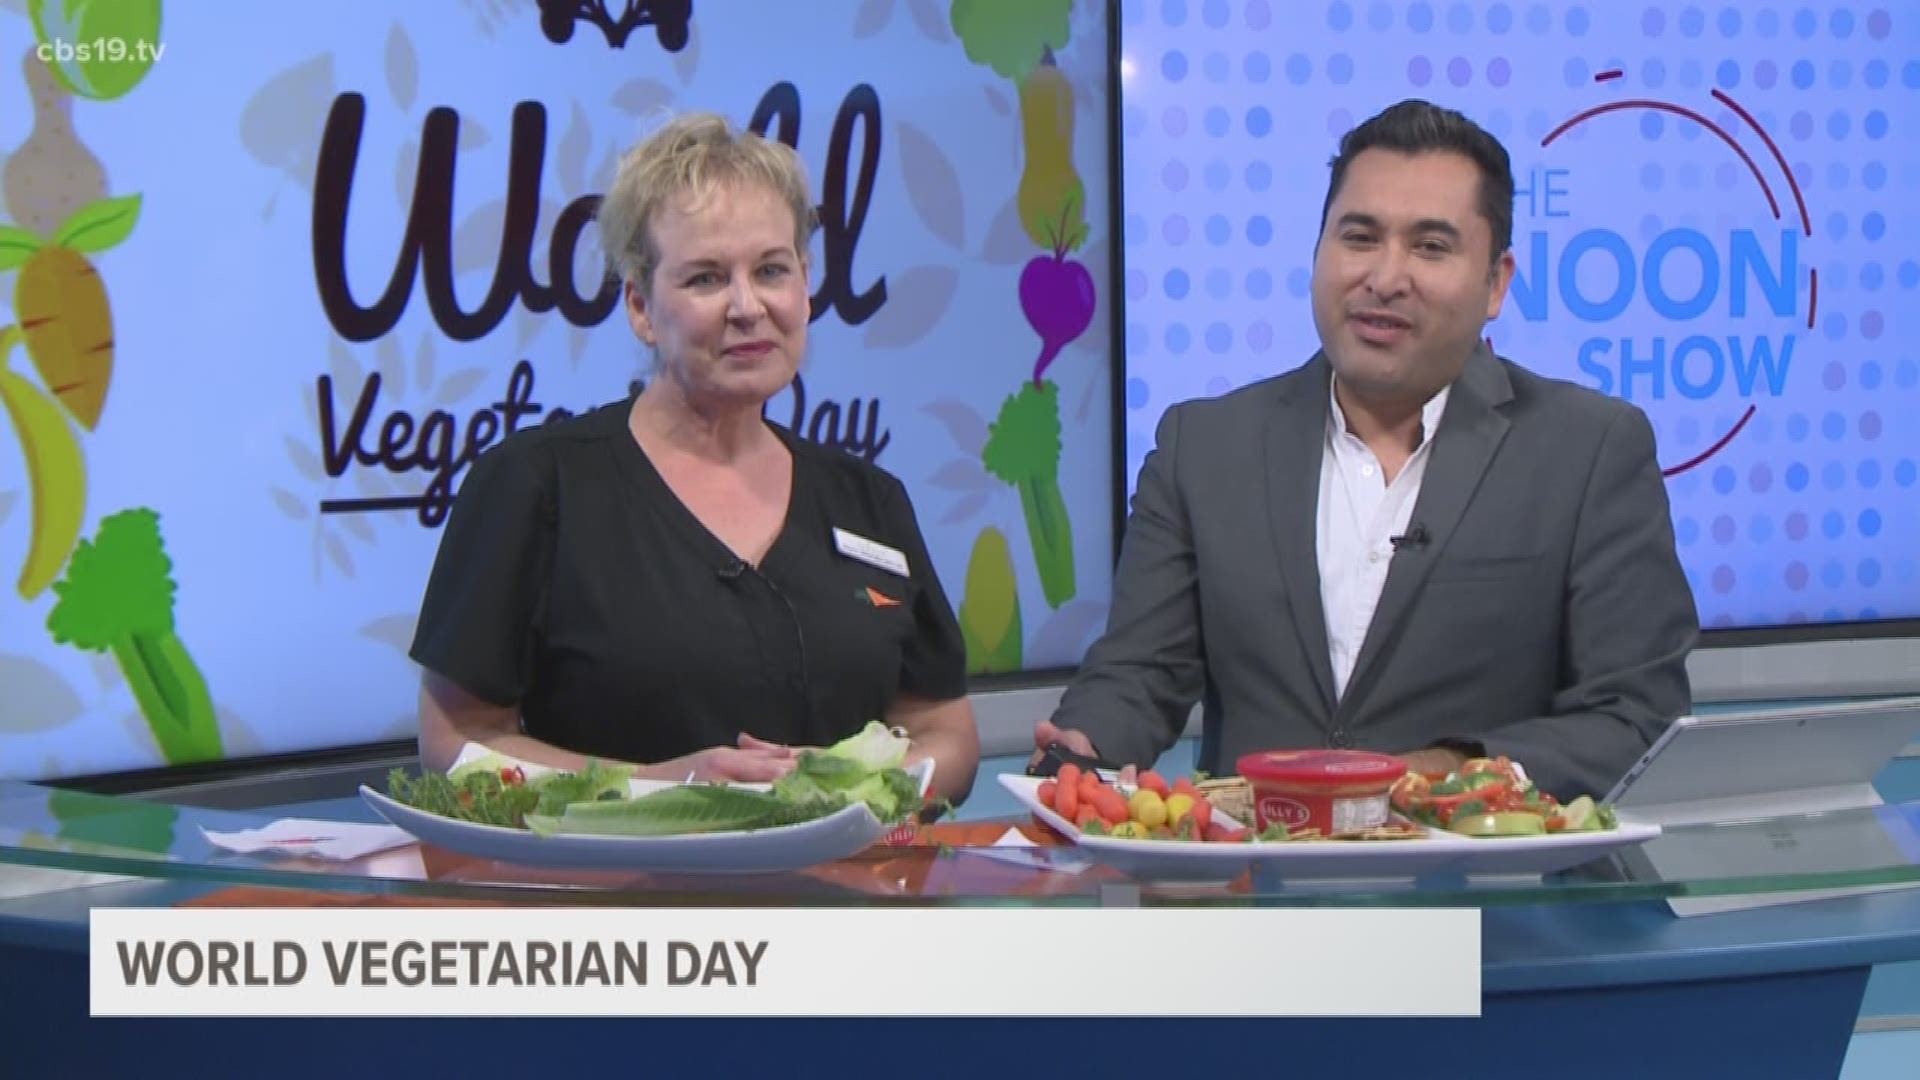 For World Vegetarian Day, food expert Sharon Seibenlist explains some healthy options for meals and snacks.